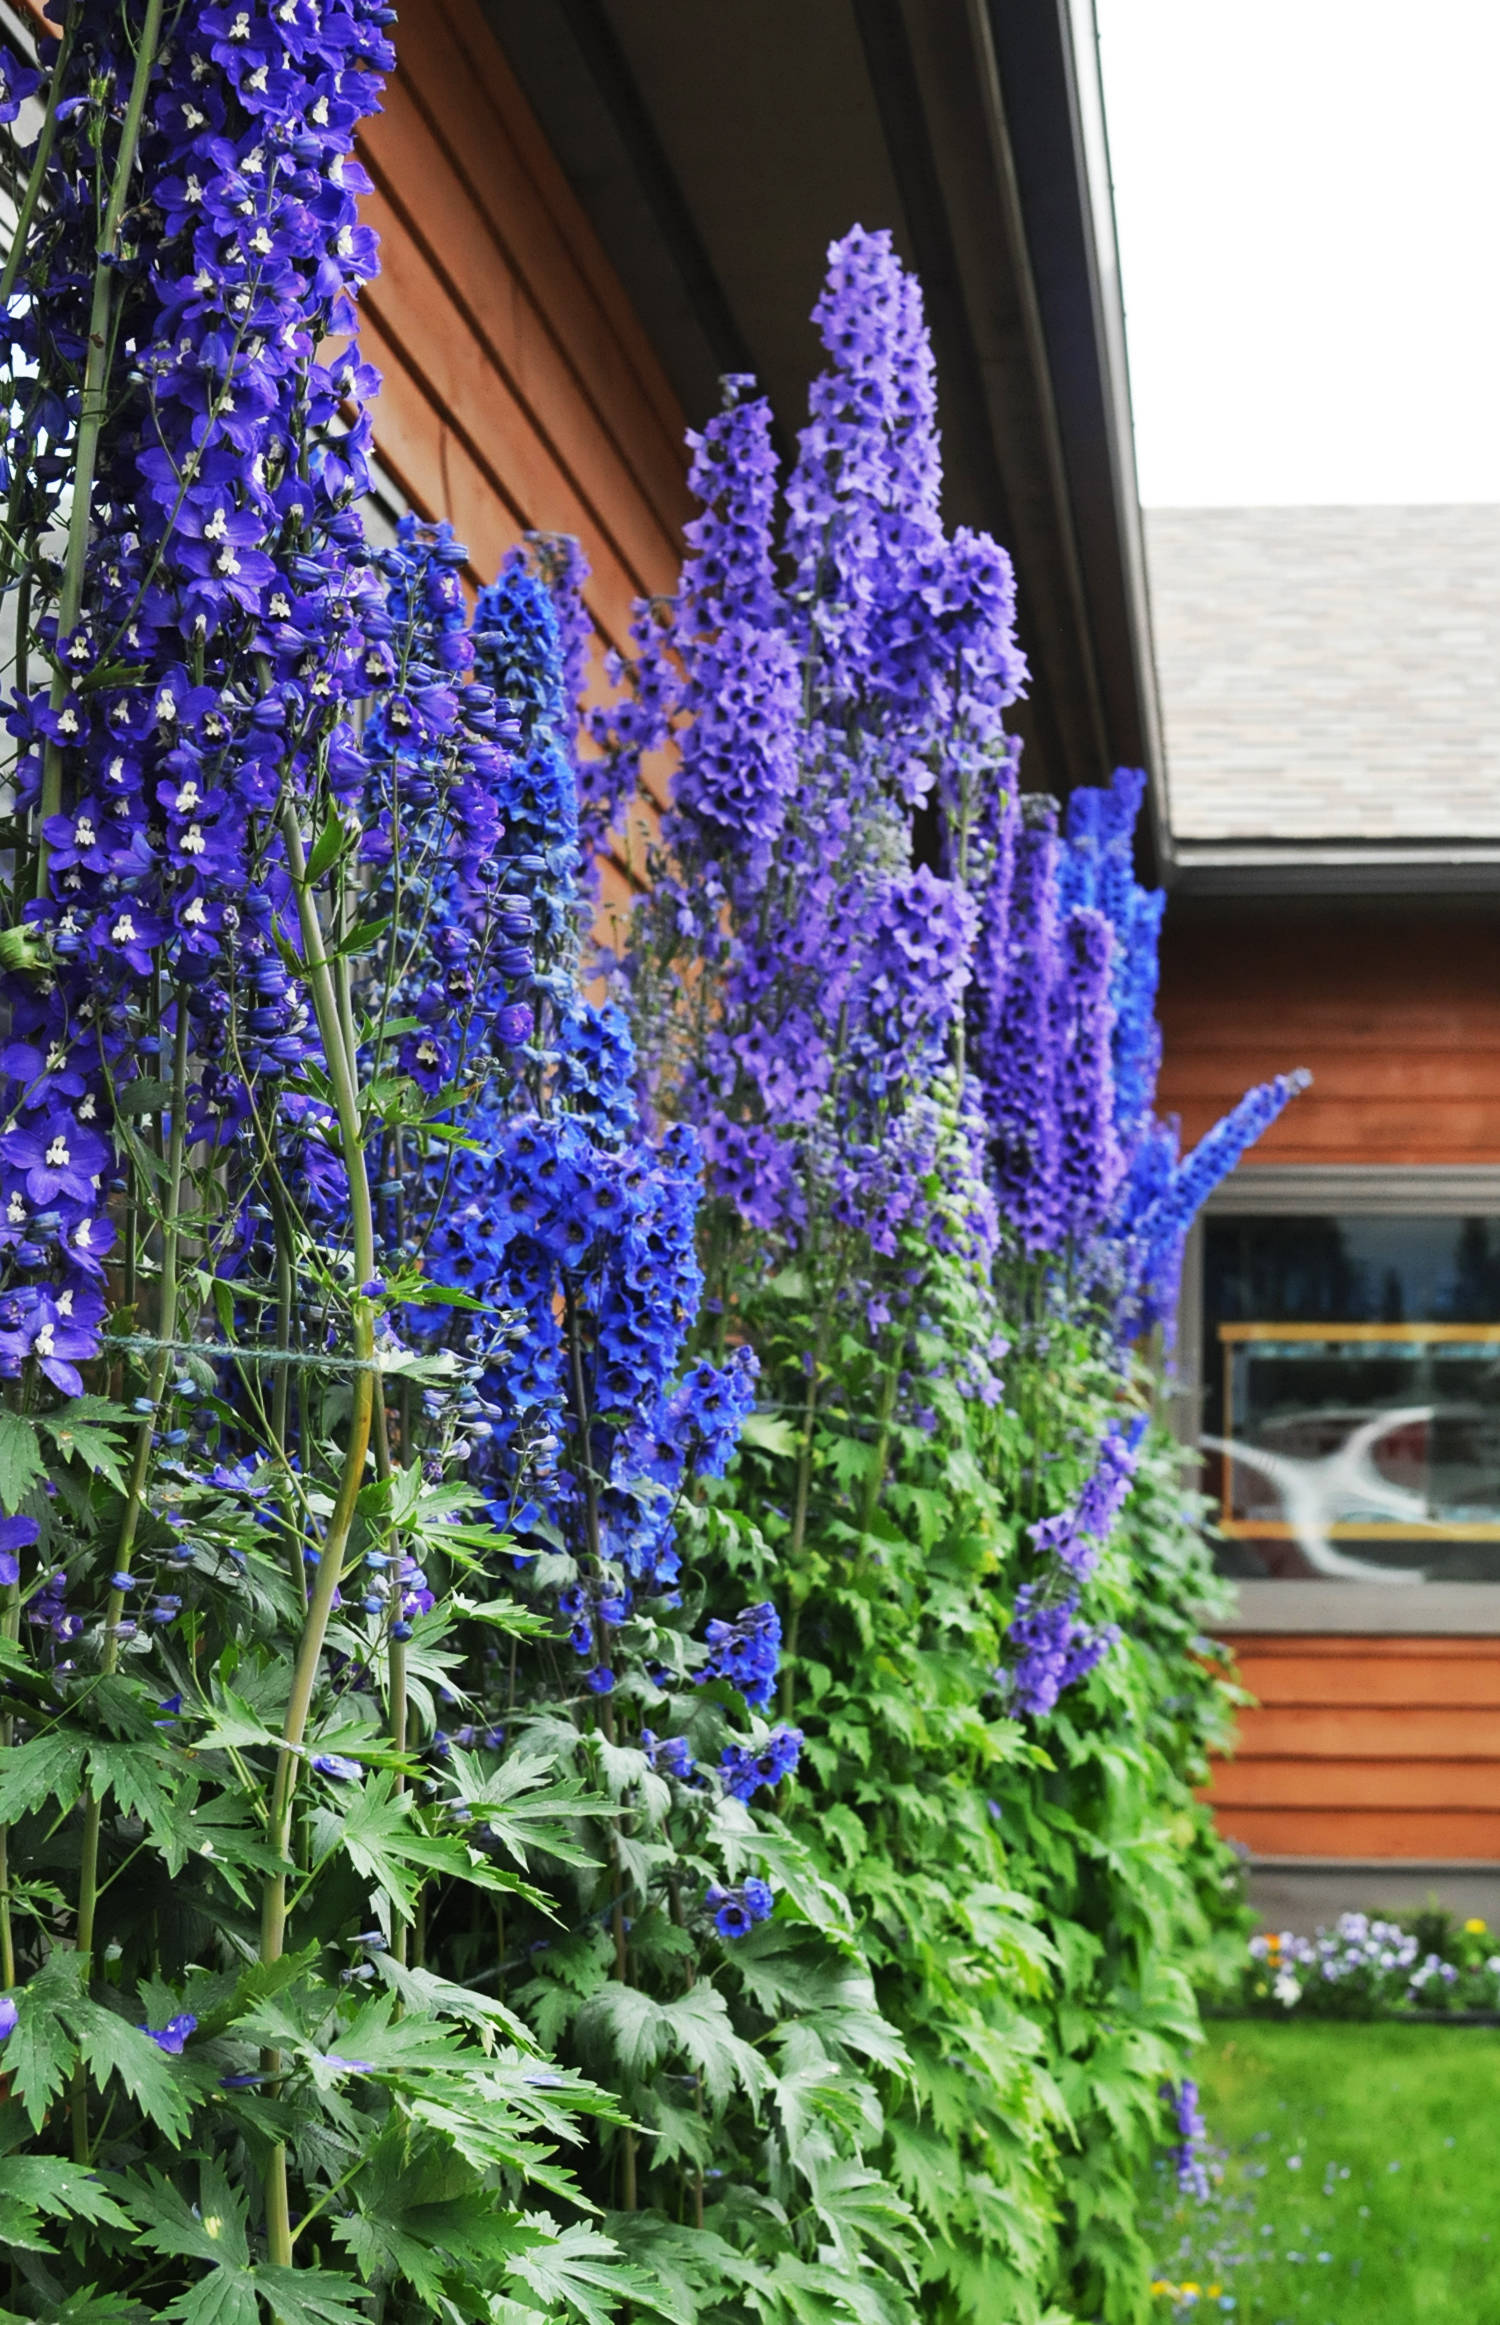 Delphinium plants reach for the sky on the front lawn of the Soldotna Senior Center on Tuesday, Aug. 1, 2017 in Soldotna, Alaska. Jan Fena, the director of the senior center, said the plants on the front lawn are all maintained by volunteers. (Photo by Elizabeth Earl/Peninsula Clarion)